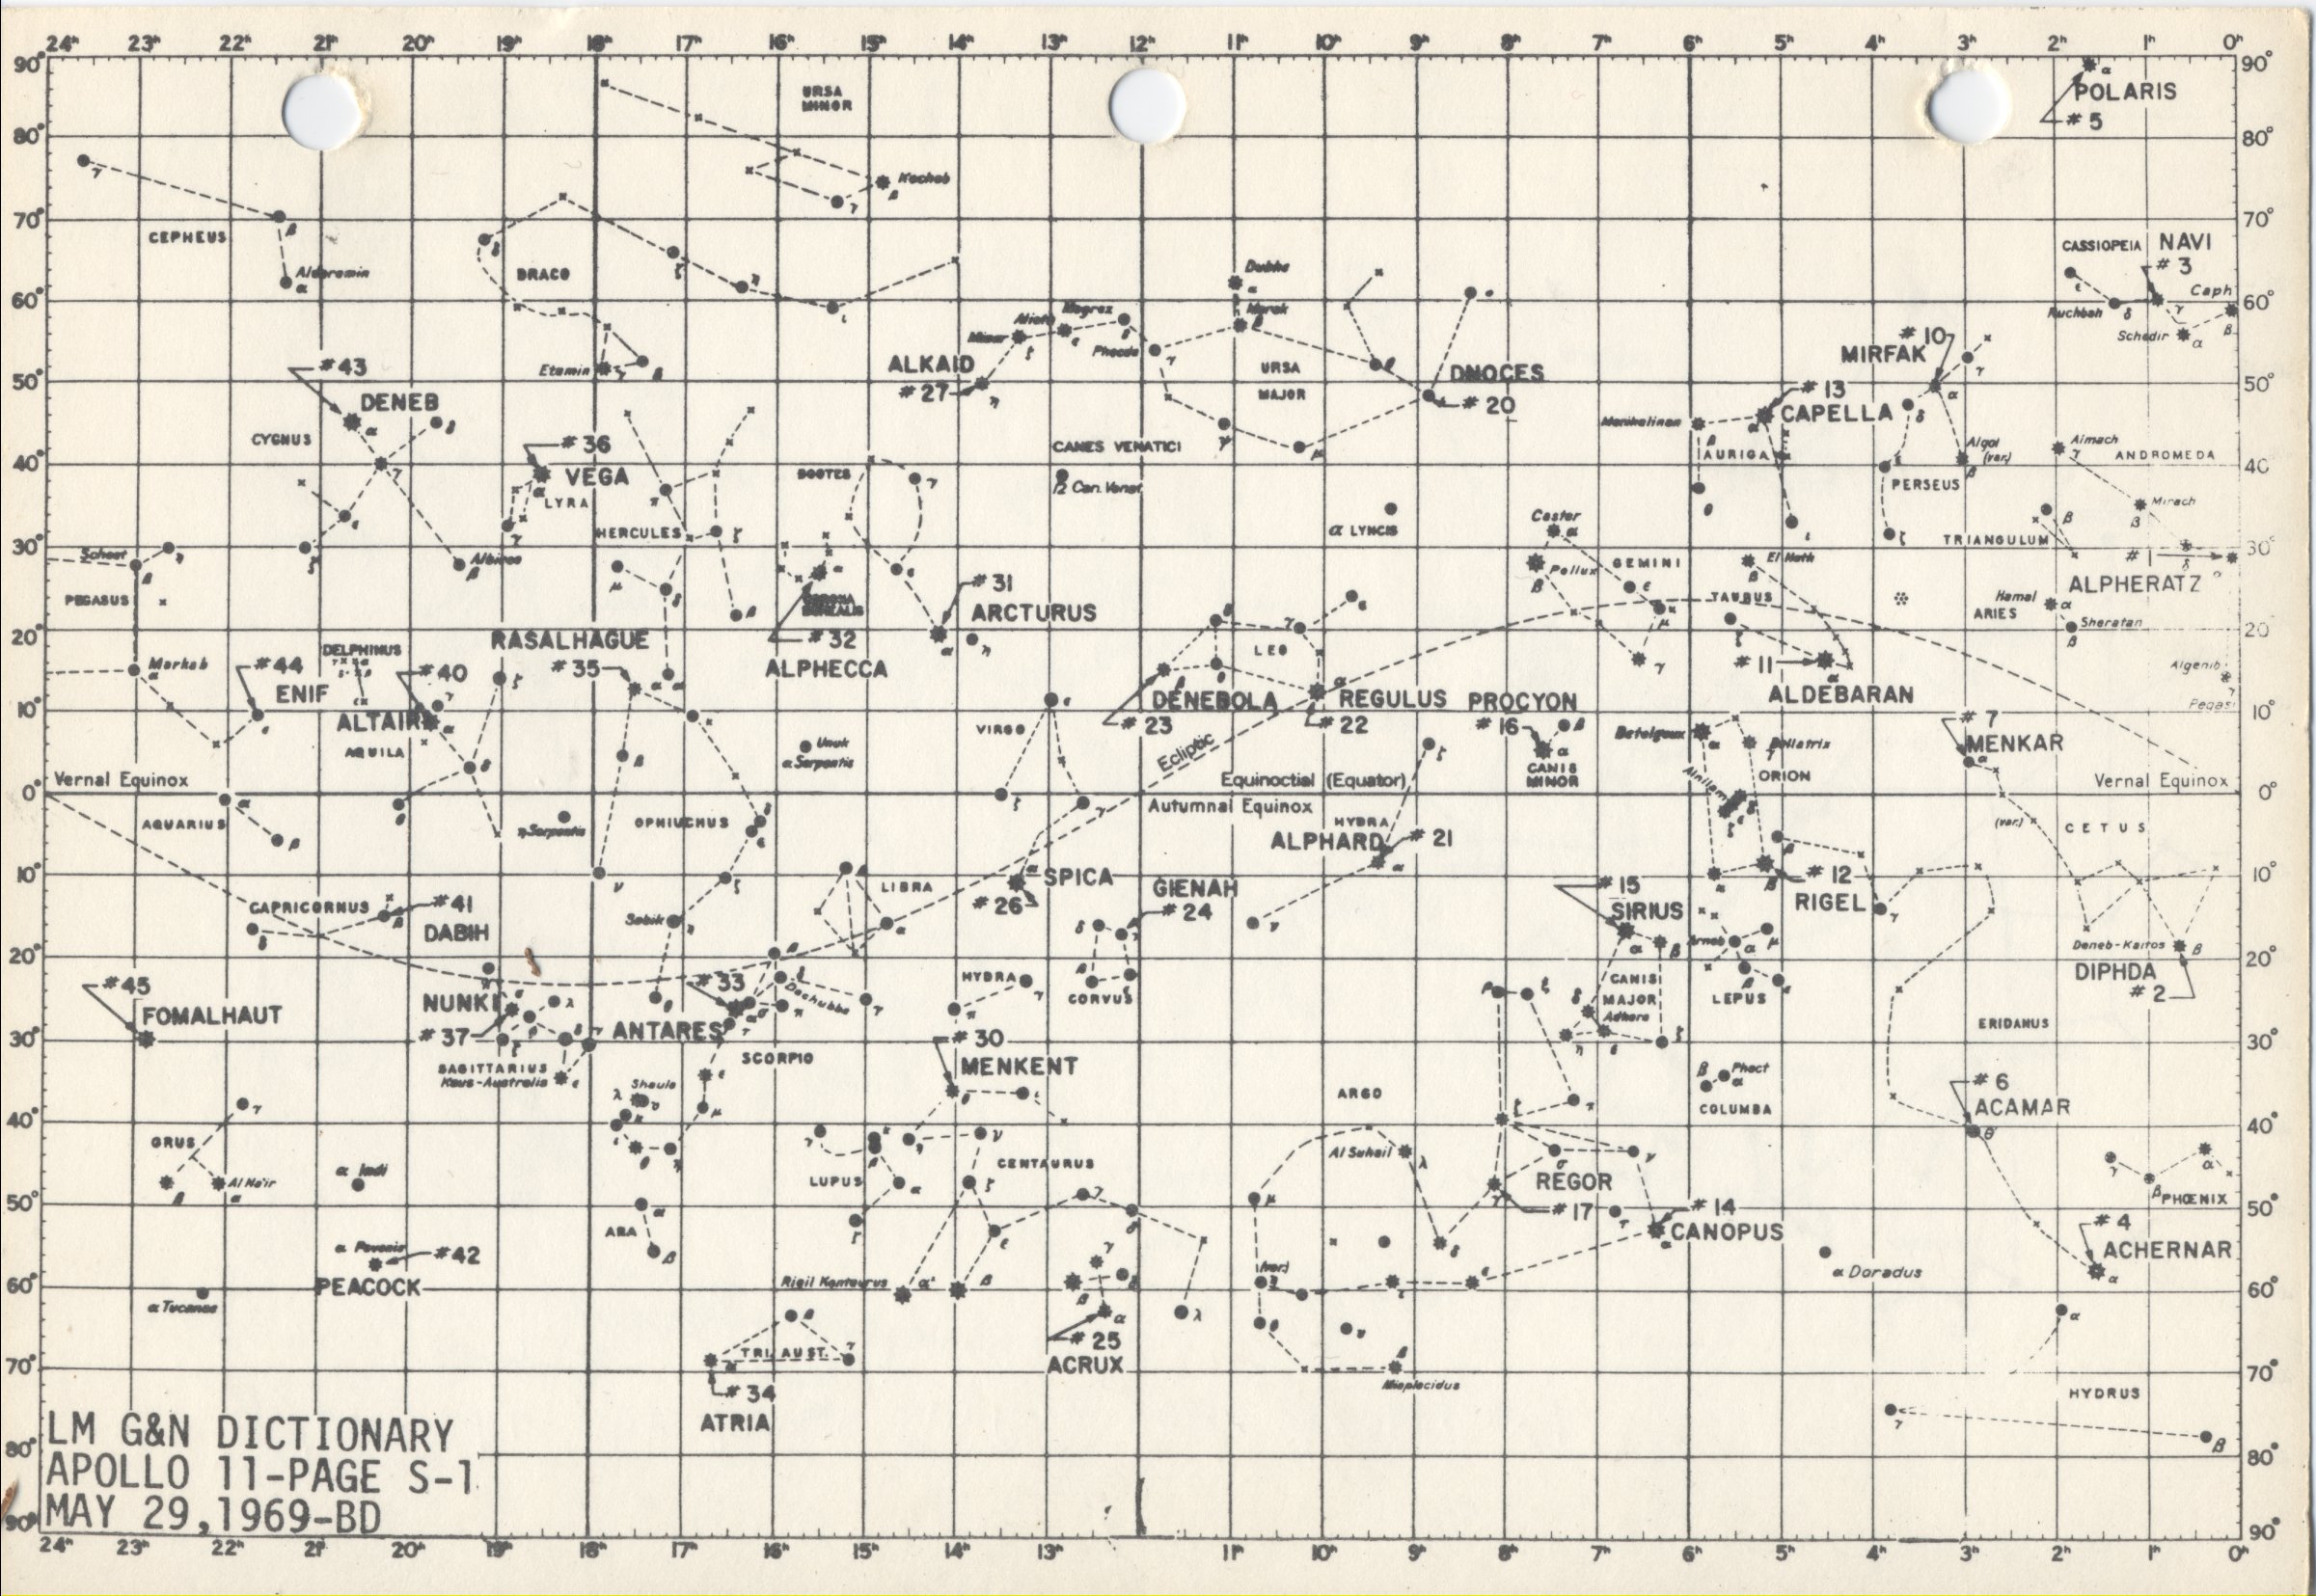 Flown Version of LM G&N Dictionary, Apollo 11, Page S-1, May 29, 1969-BD. Private Collection. Scans Courtesy Larry McGlynn. https://www.hq.nasa.gov/alsj/a11/A11StarCharts.html. Accessed by Jim Johnson on July 18, 2014.